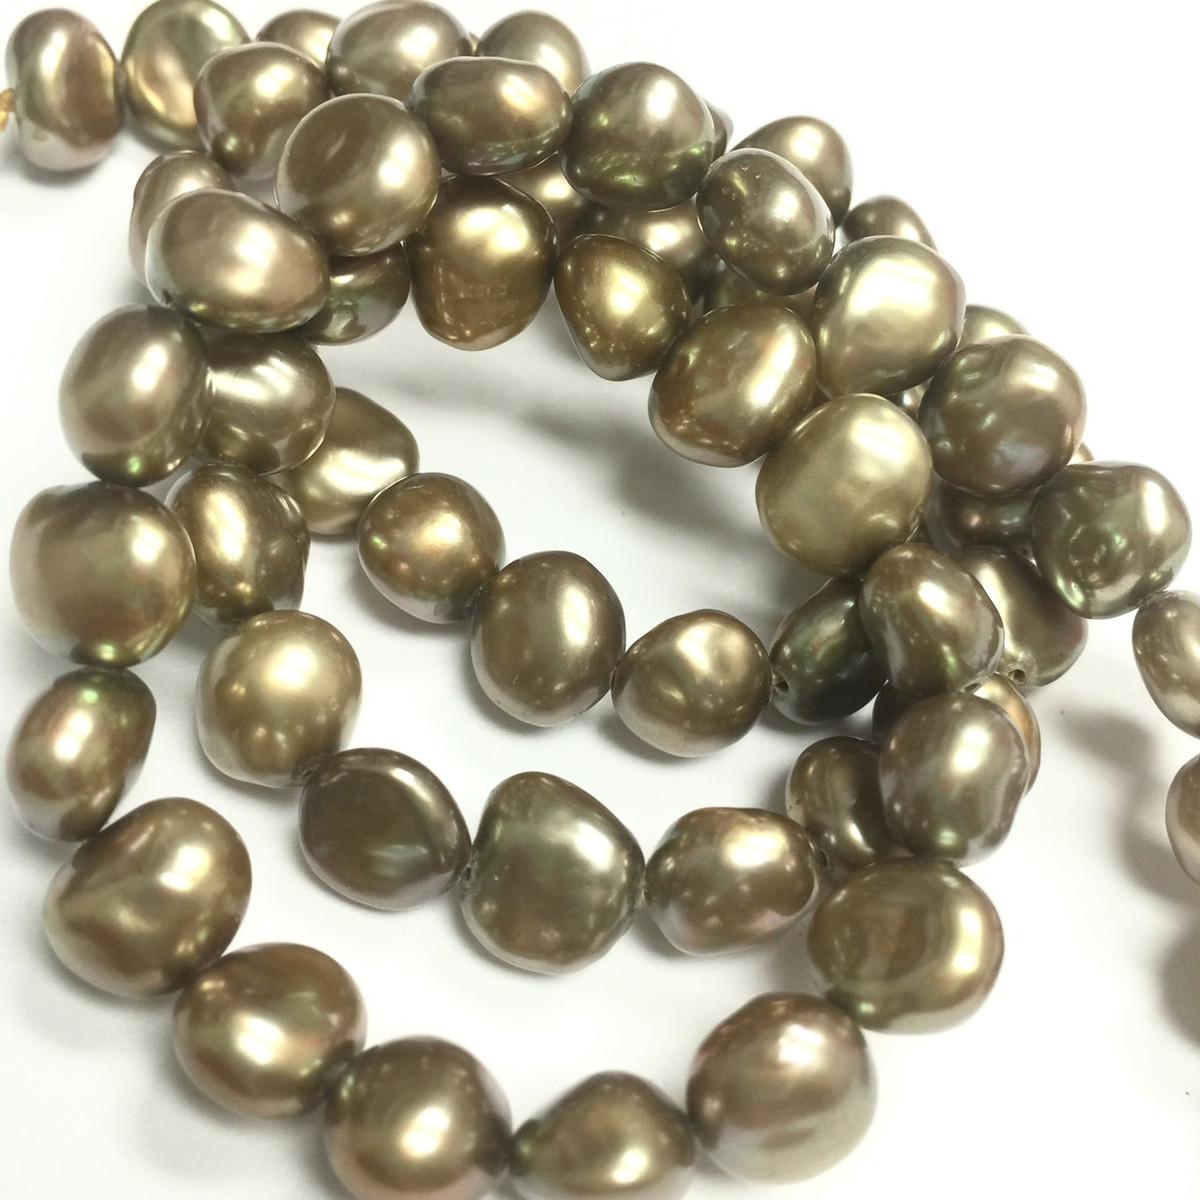 Golden Goodness Freshwater Pearl Nugget Beads 7-9mm